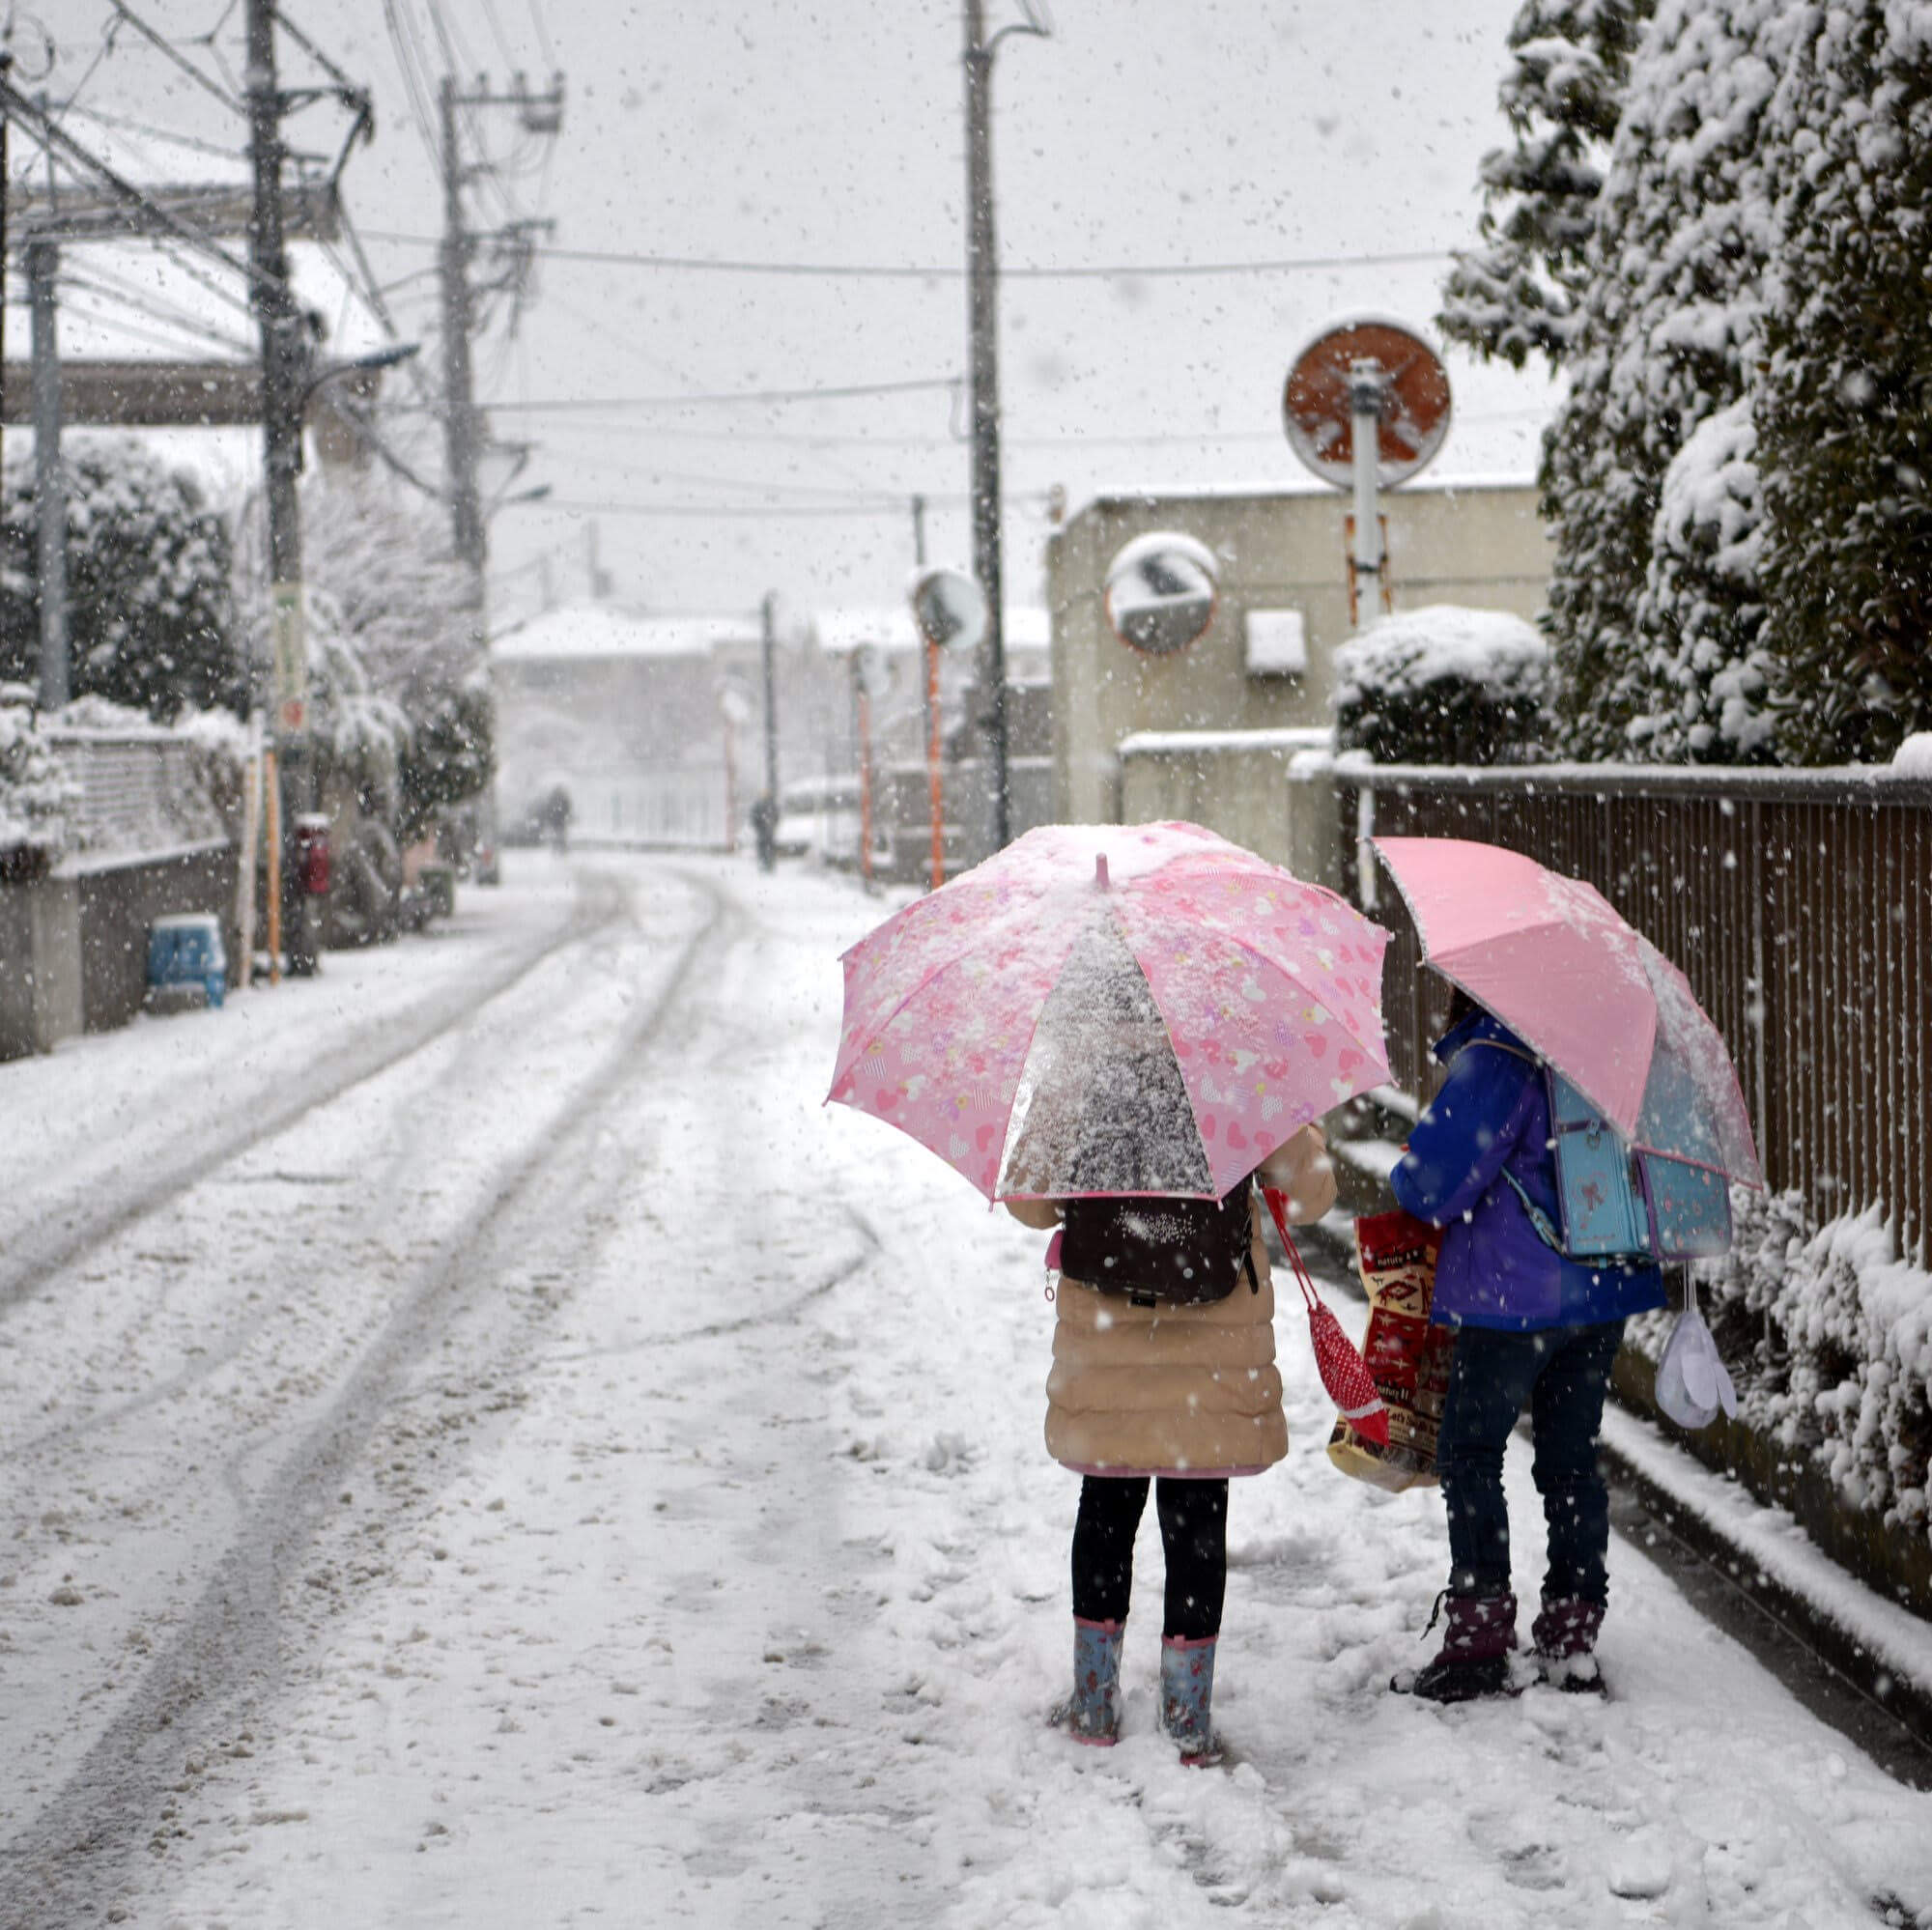 Tokyo Snow Scapes photo9